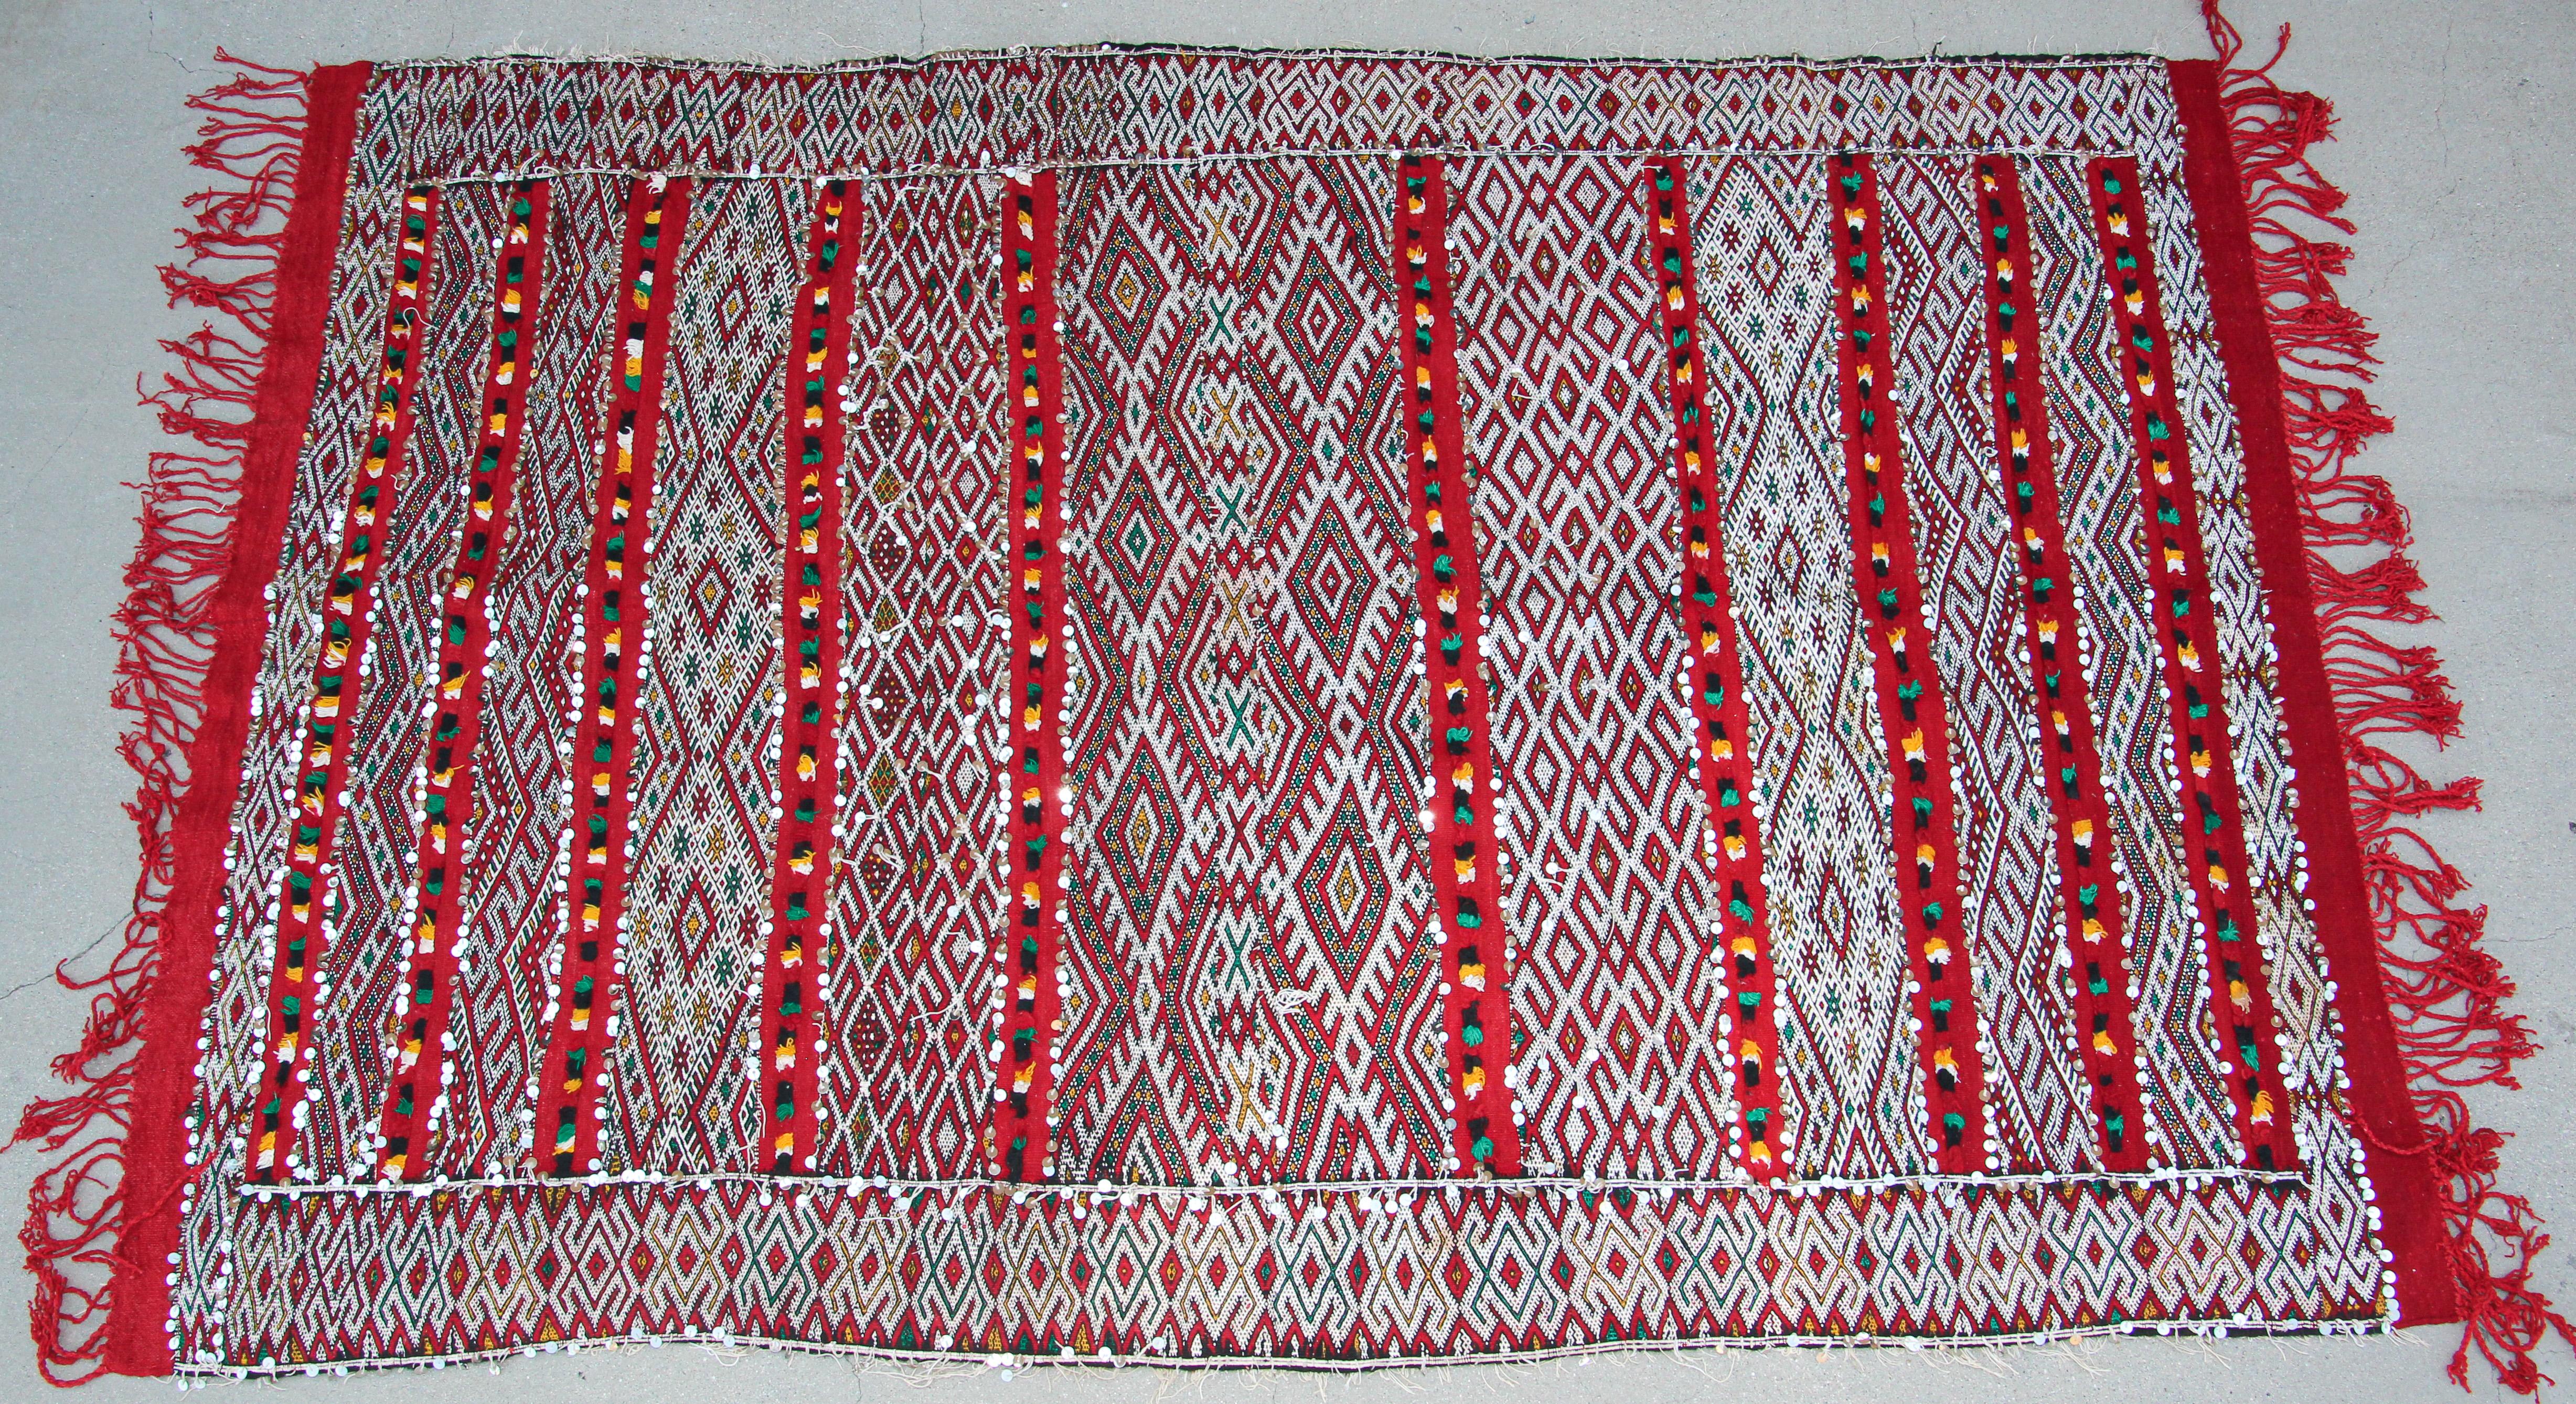 1960s authentic Moroccan Berber wedding rug with sequins North Africa, Handira.Handwoven vintage Moroccan Berber Tribal Handira ethnic textile.Moroccan Bohemian style rug, handwoven by the Berber women of the Zemmour tribe for their wedding day.The